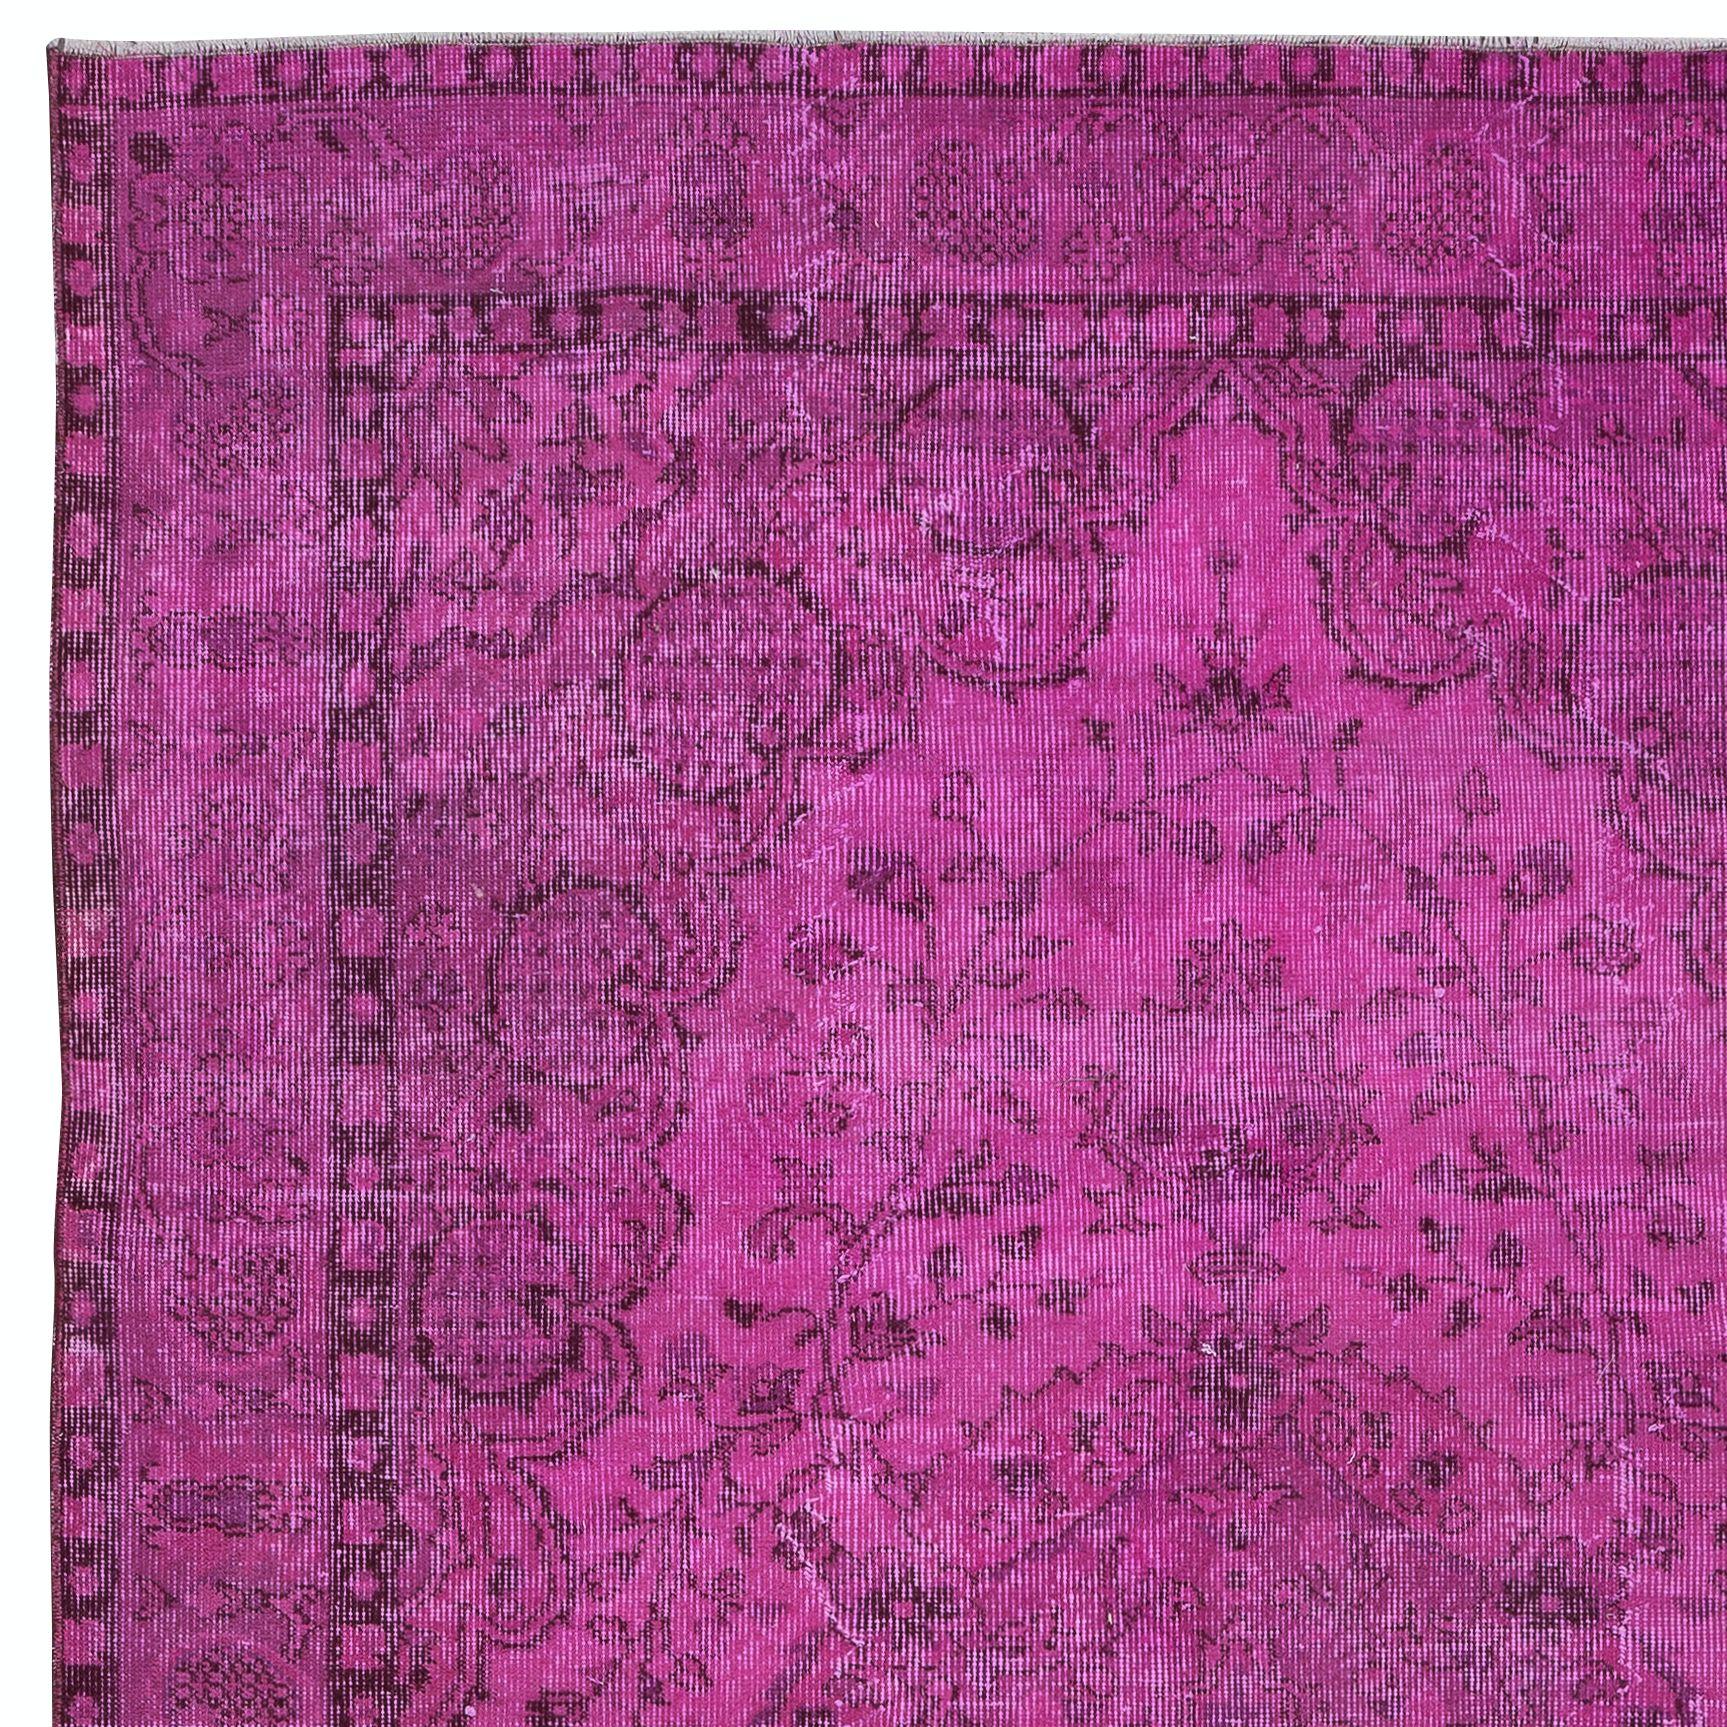 Hand-Woven 5.6x9 Ft Pink Handmade Turkish Wool Area Rug, Contemporary Low Pile Carpet For Sale